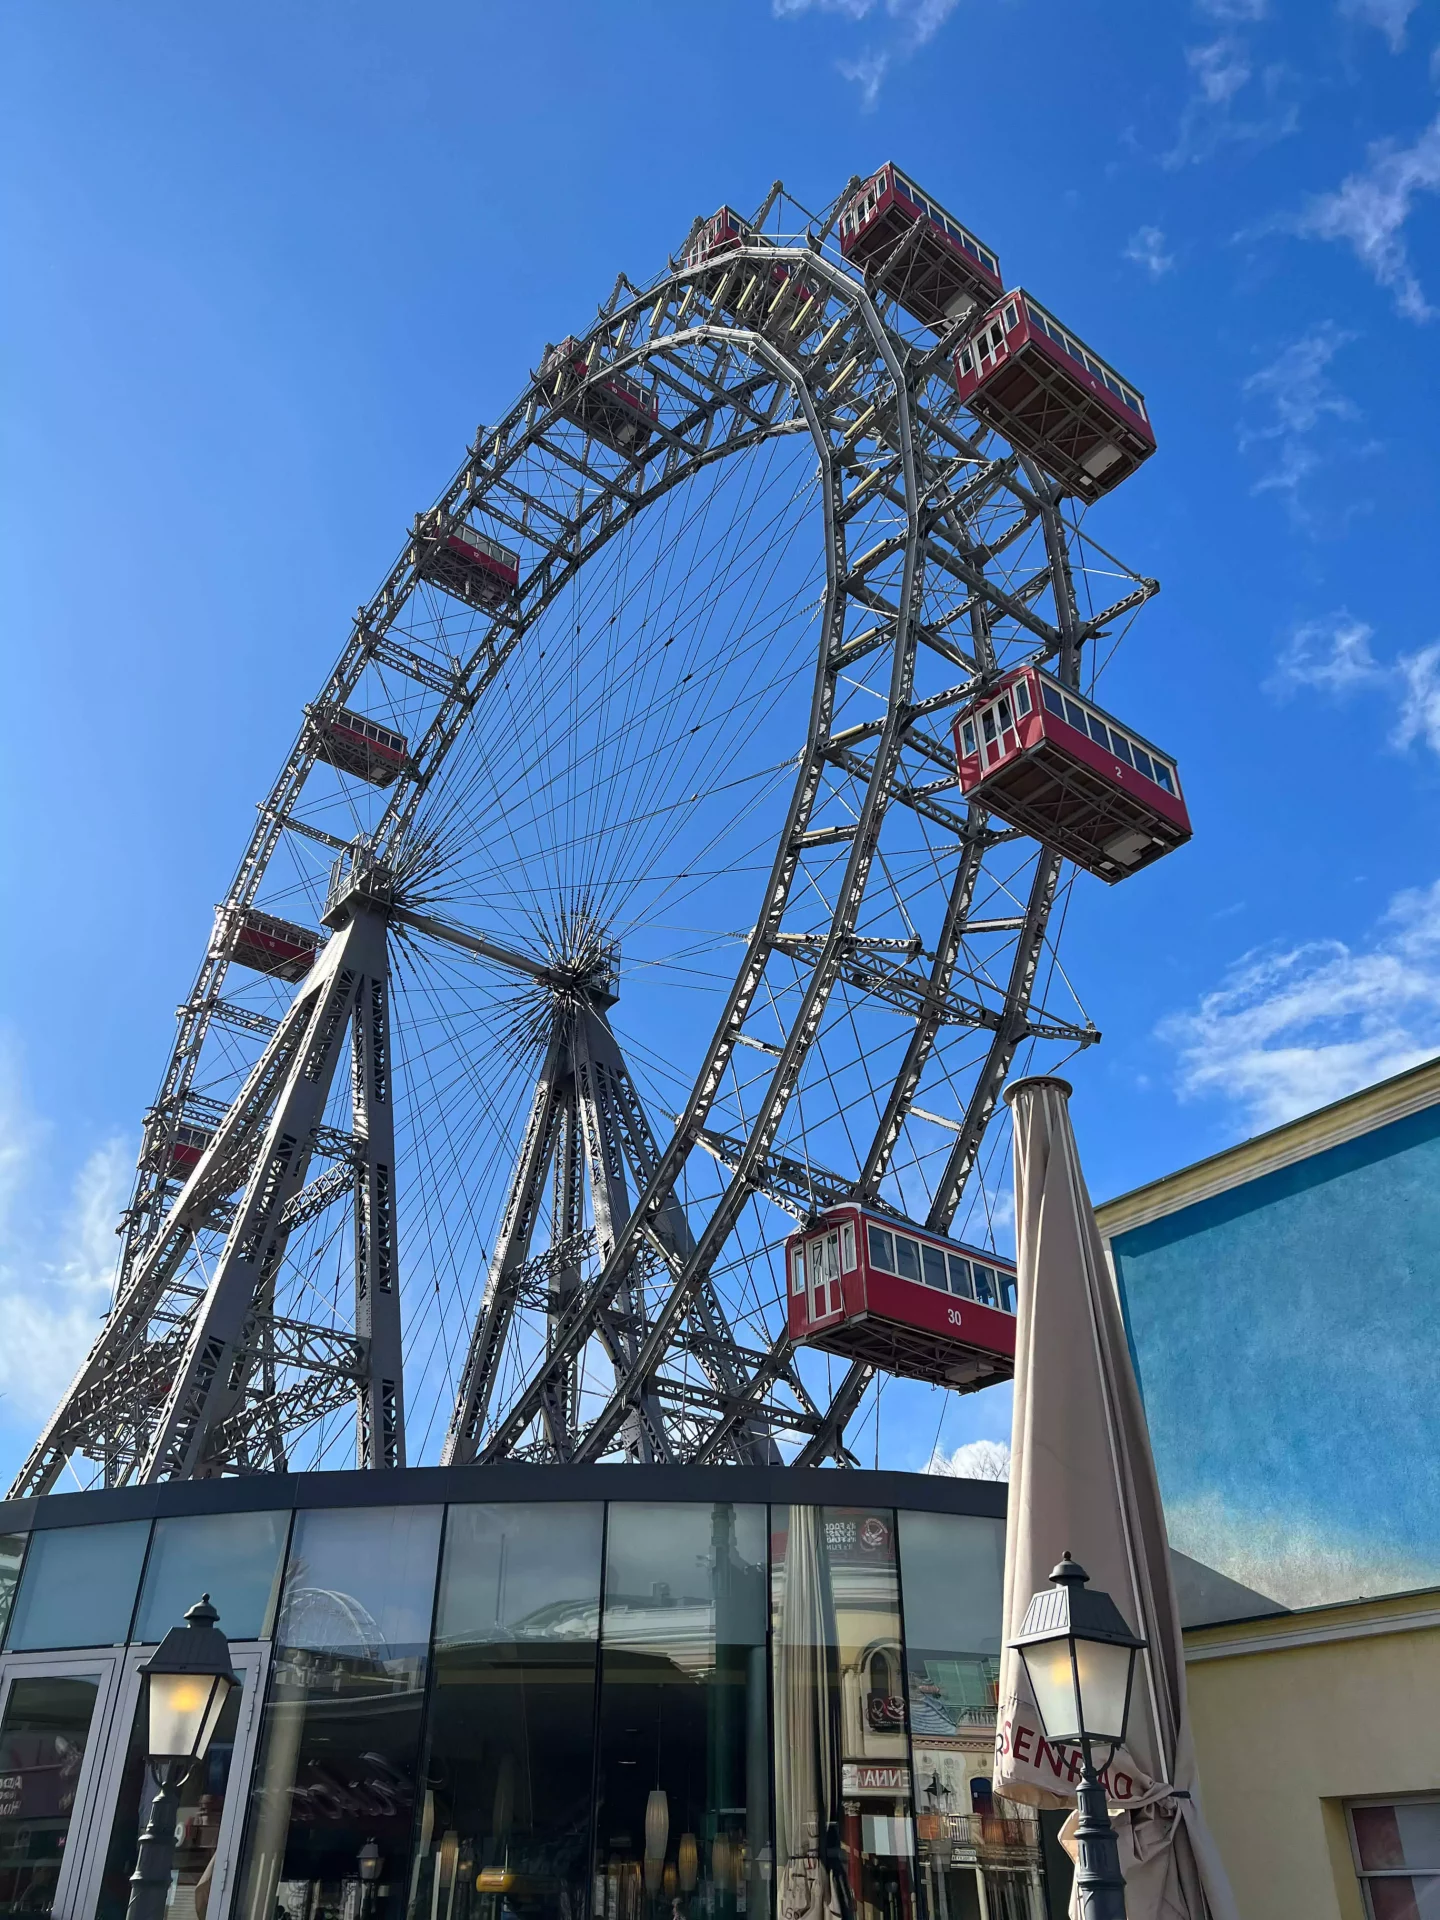 Ride the Giant Ferris Wheel at the Prater